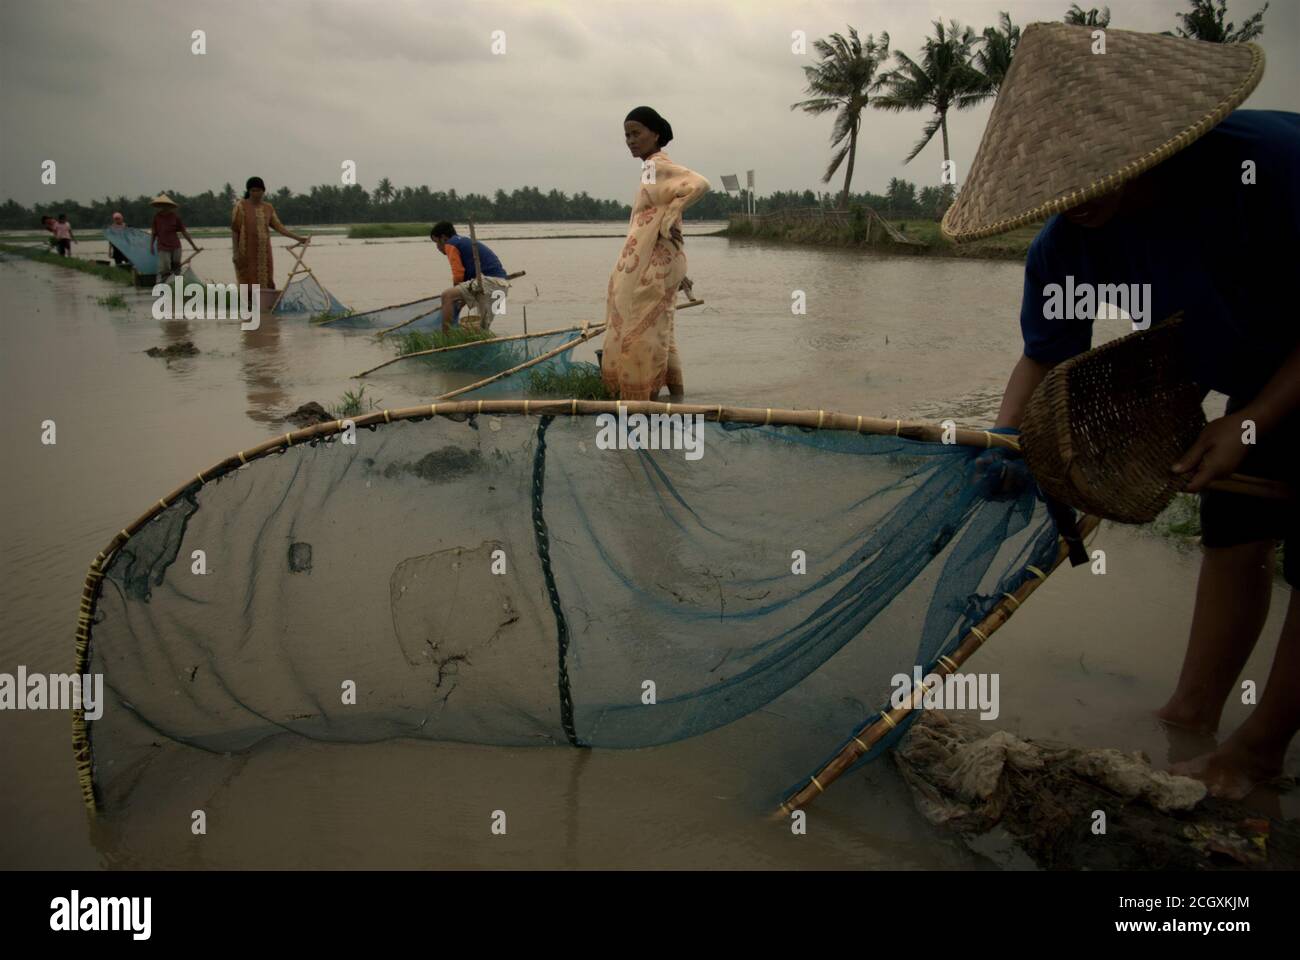 A woman farmer handling pushnet as she and fellow farmers fish on a flooded rice field during rainy season in Karawang regency, West Java province, Indonesia. Stock Photo